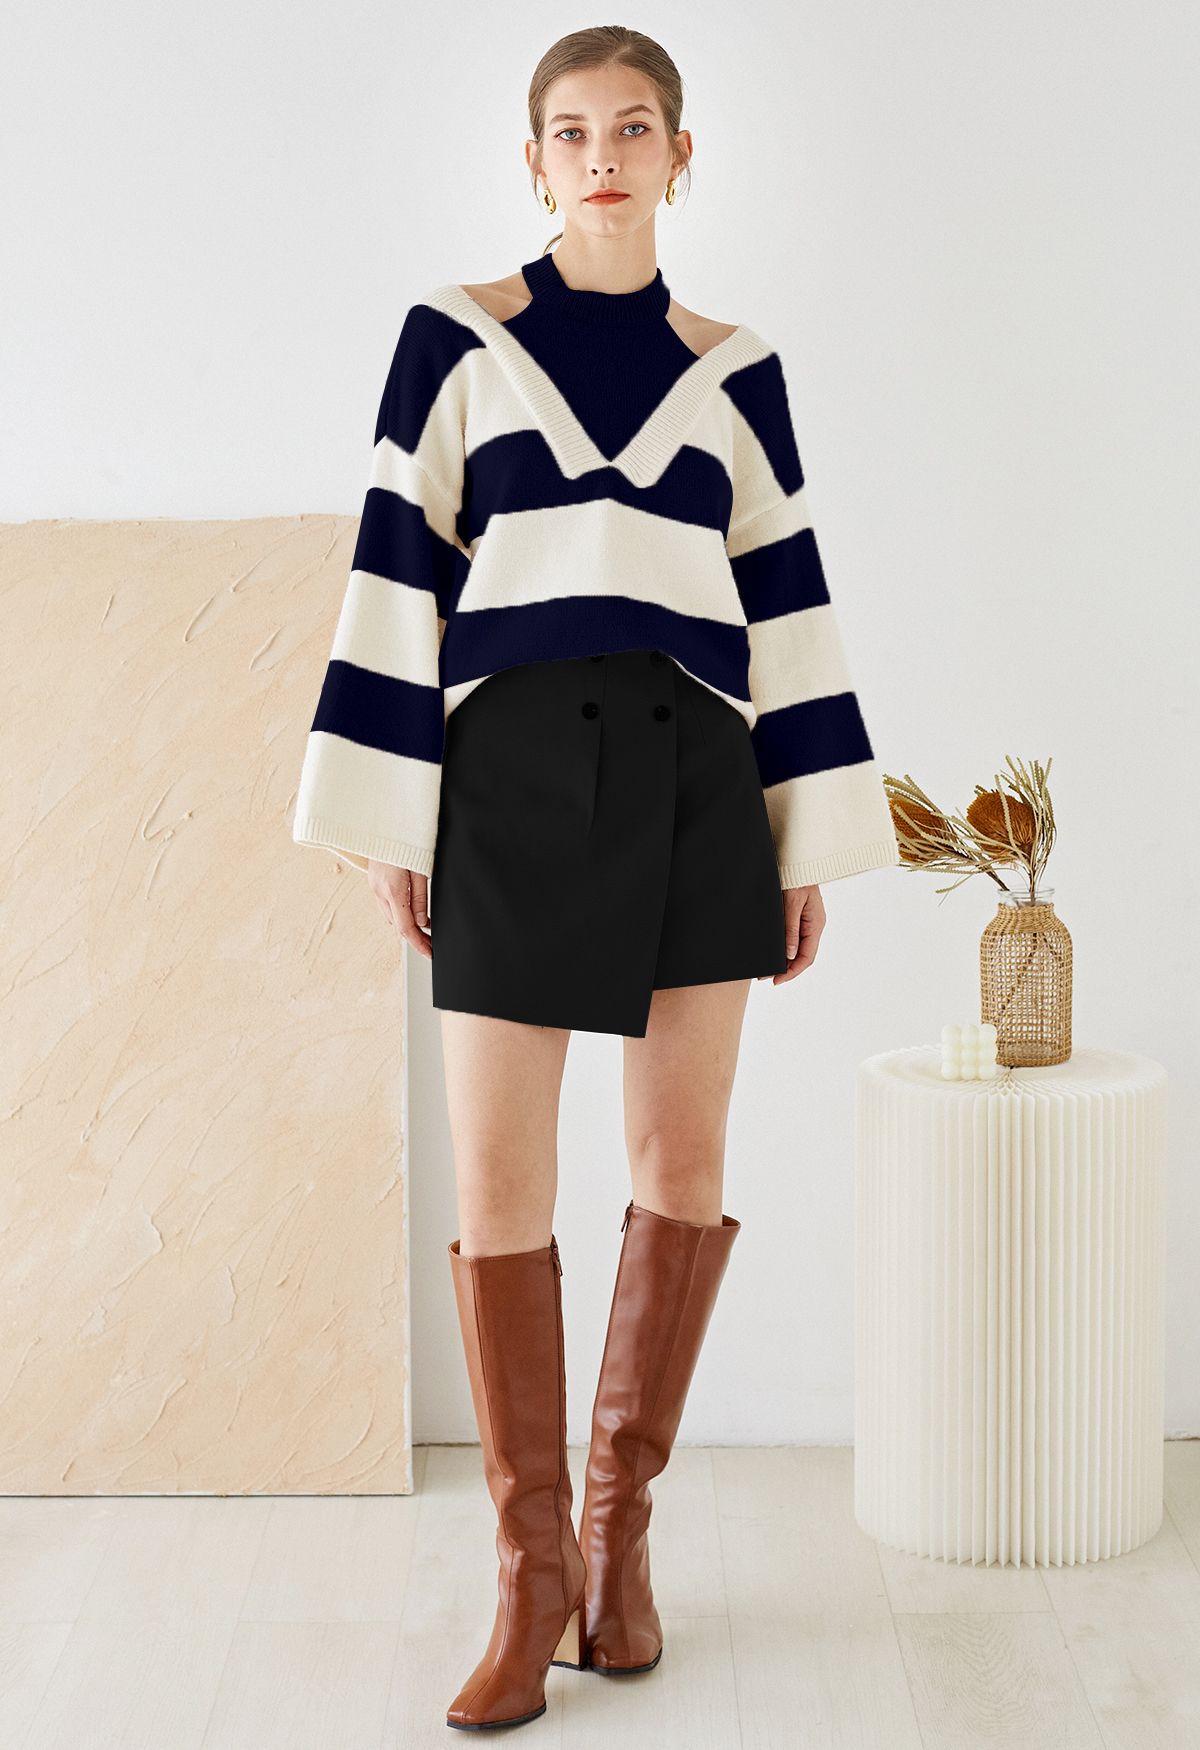 Buttoned Front Flap Mini Bud Skirt in Black